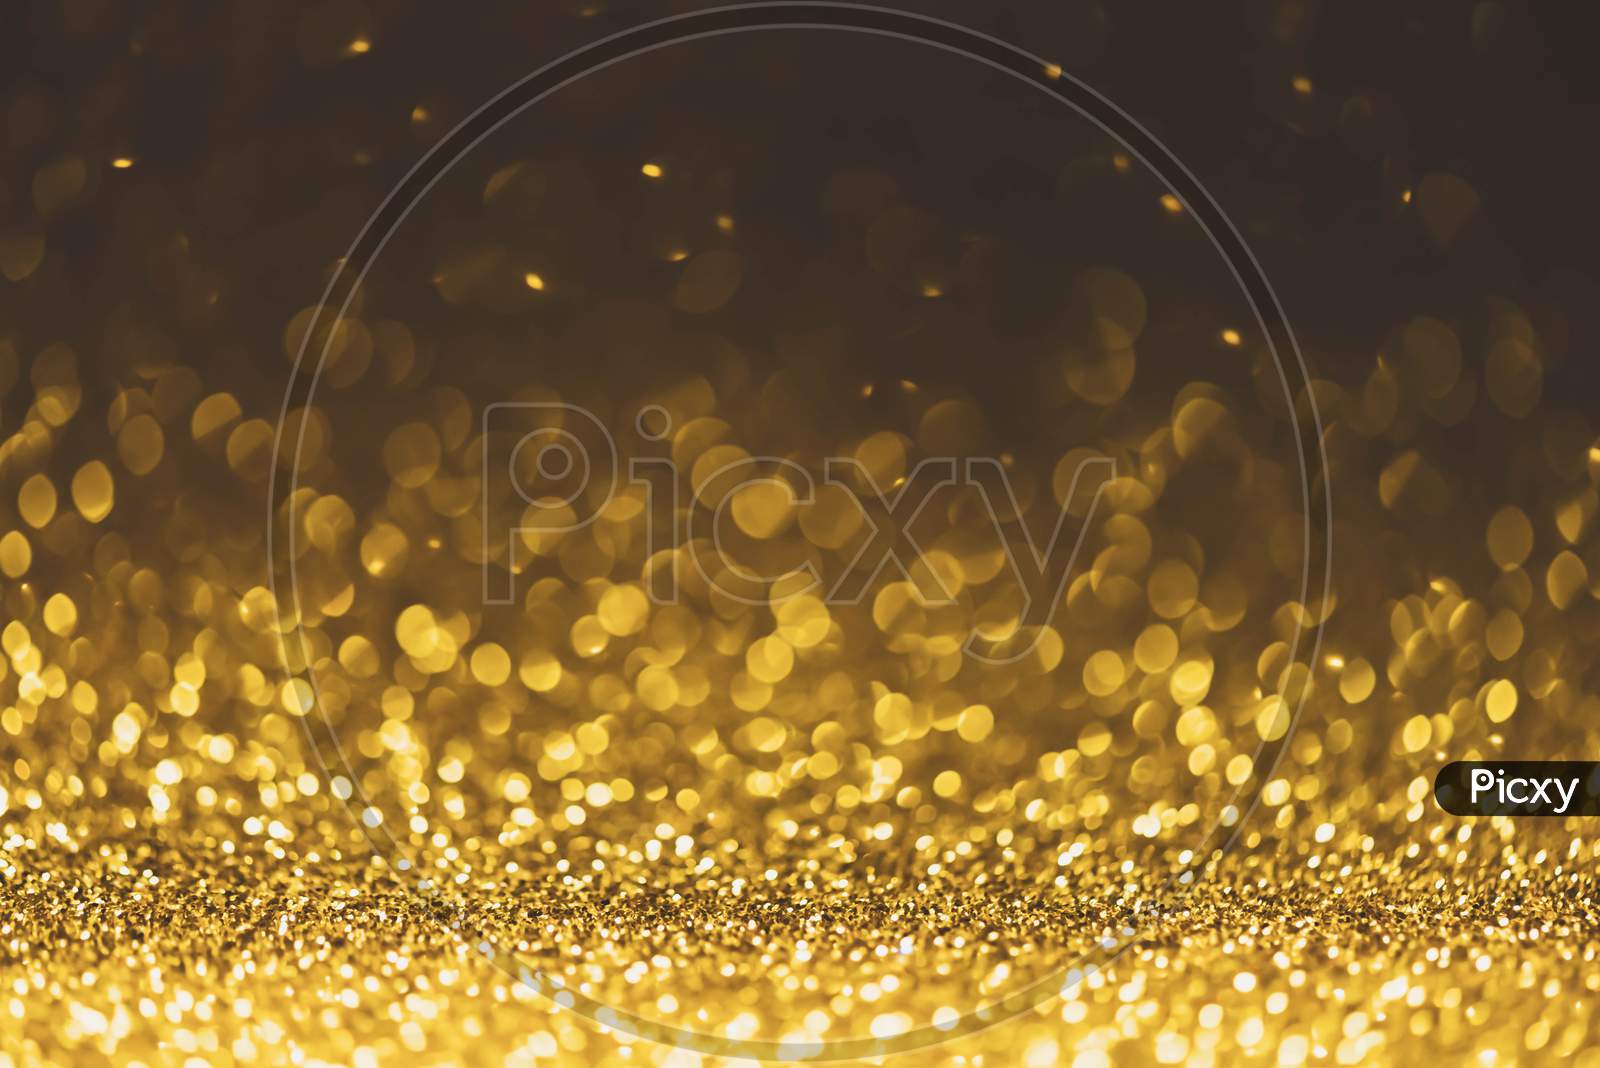 Gold Glitter Sparkle Lights Background. Defocused Glitter Abstract Twinkly Light And Shiny Stars. Christmas And New Year Party Concept Background. Closeup Stardust.